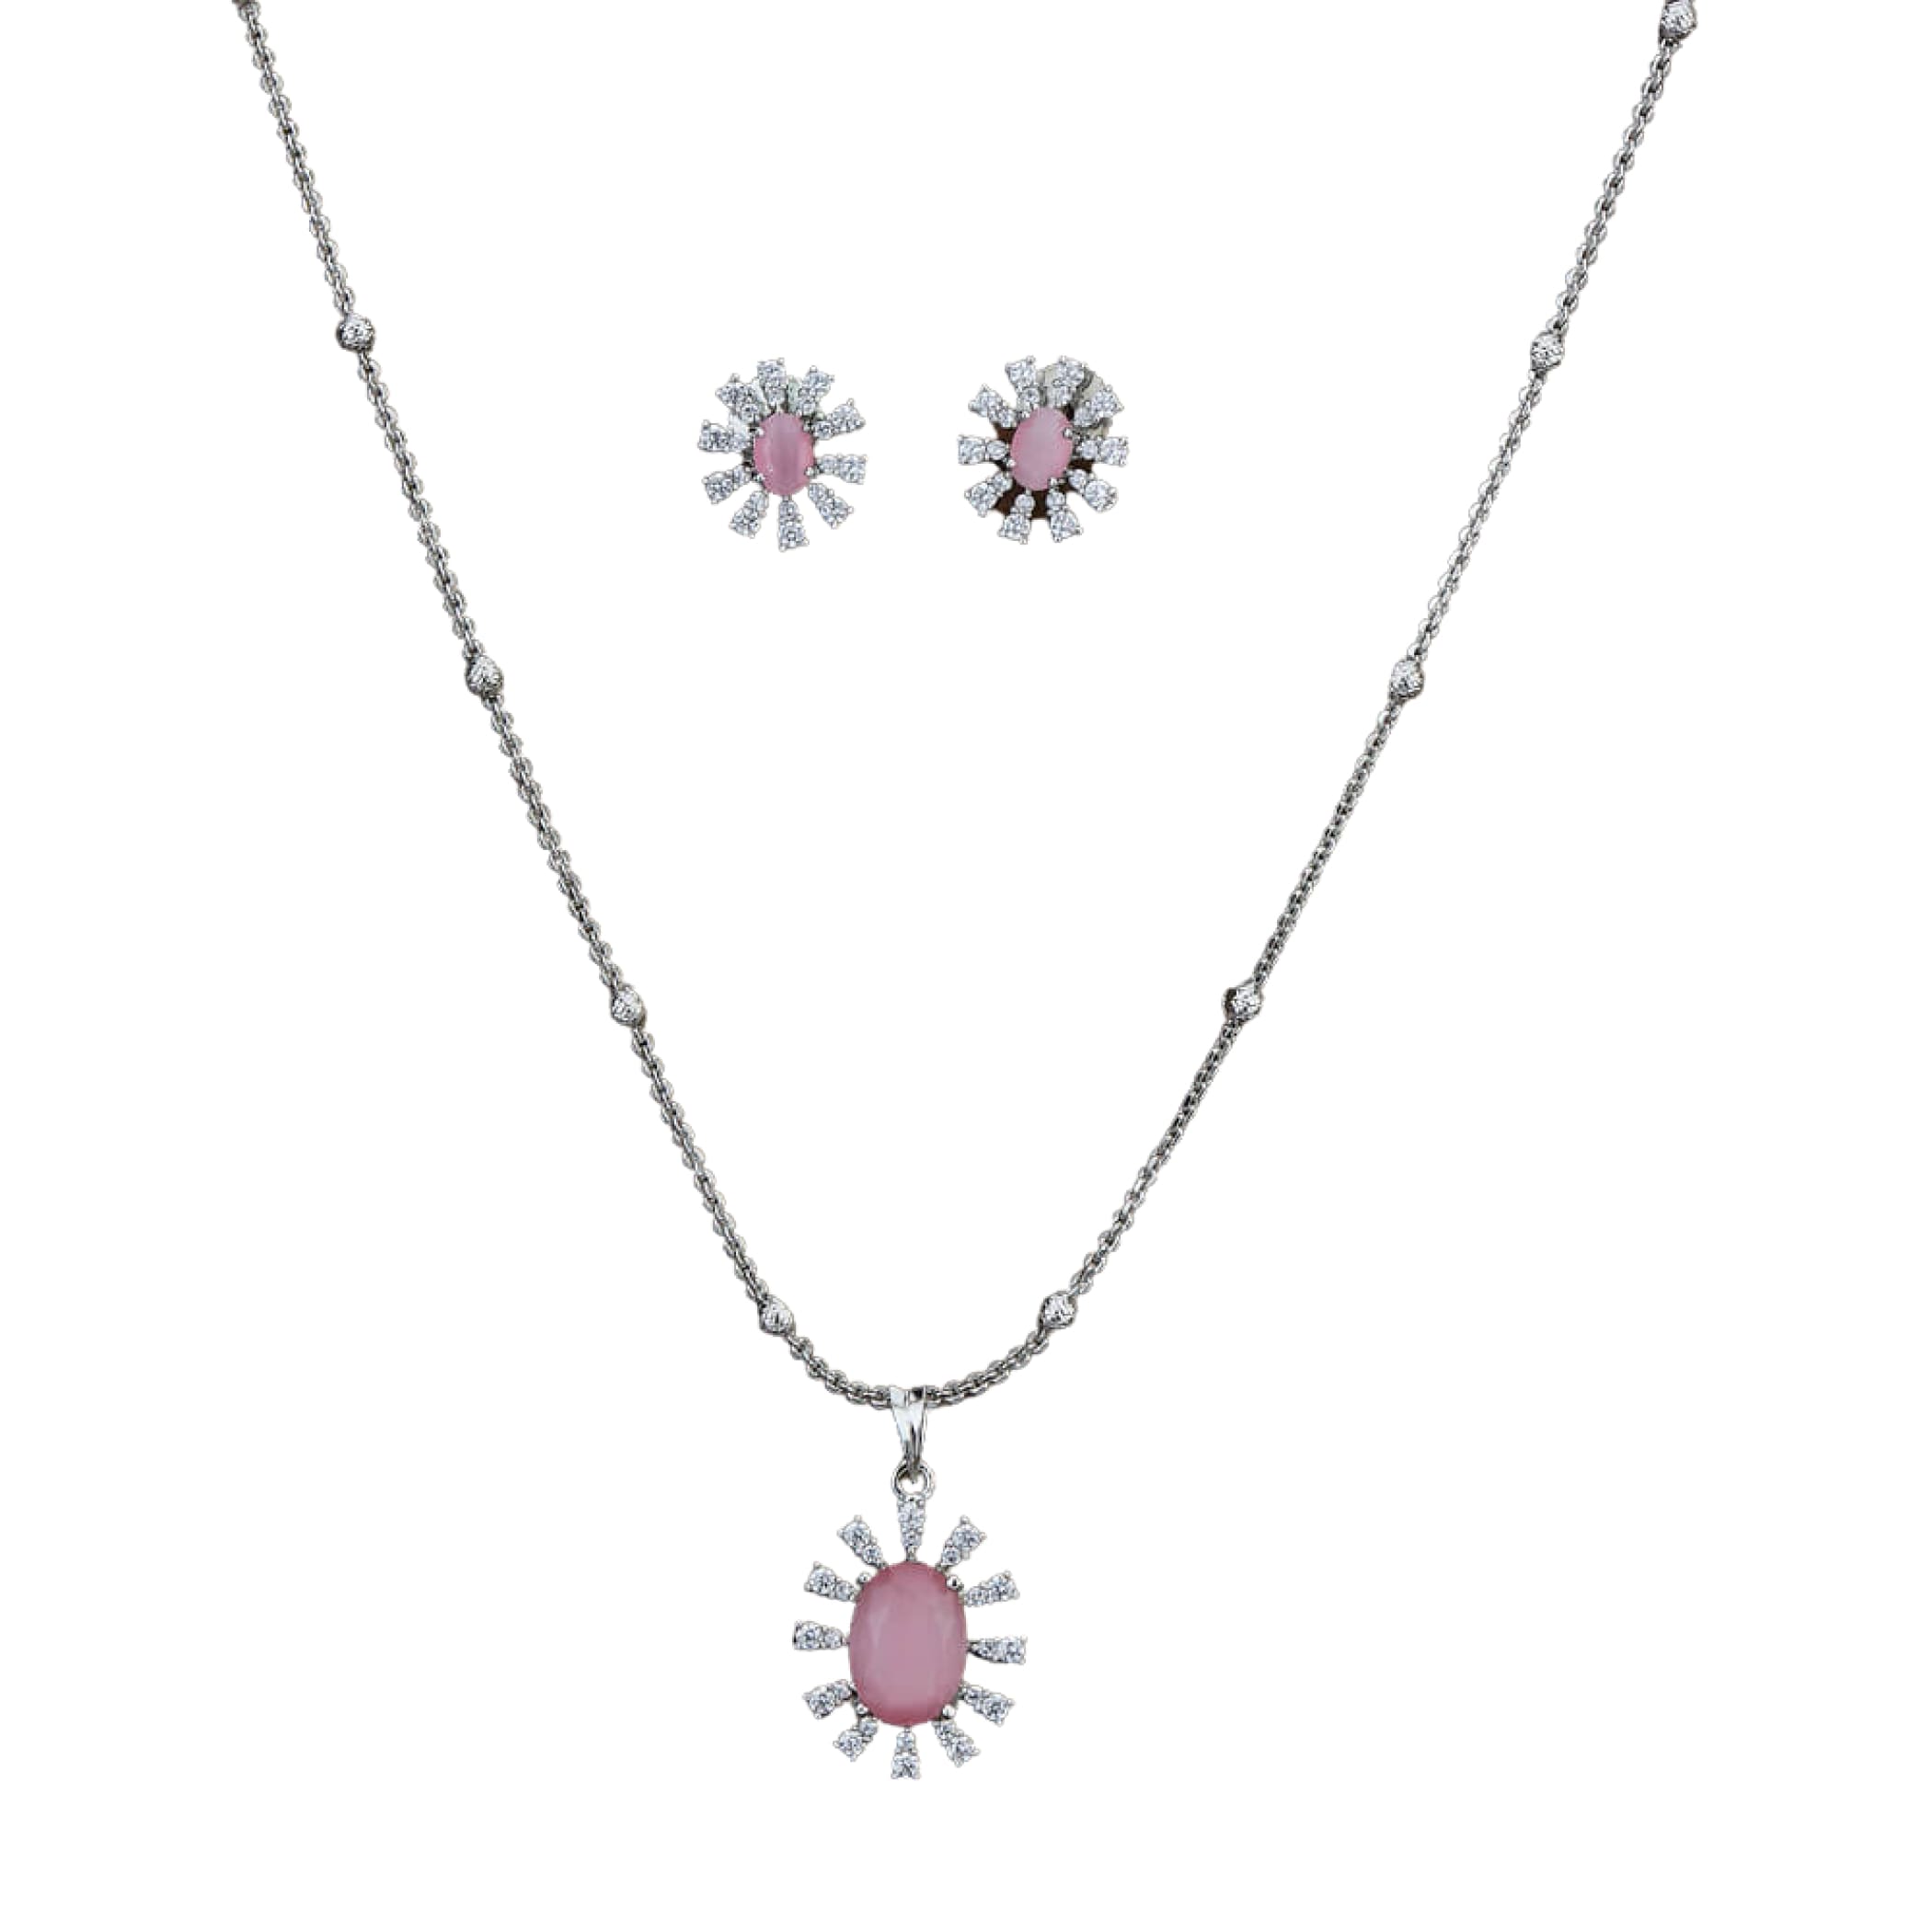 Classic necklace with rhodium plating pendant set jewelry